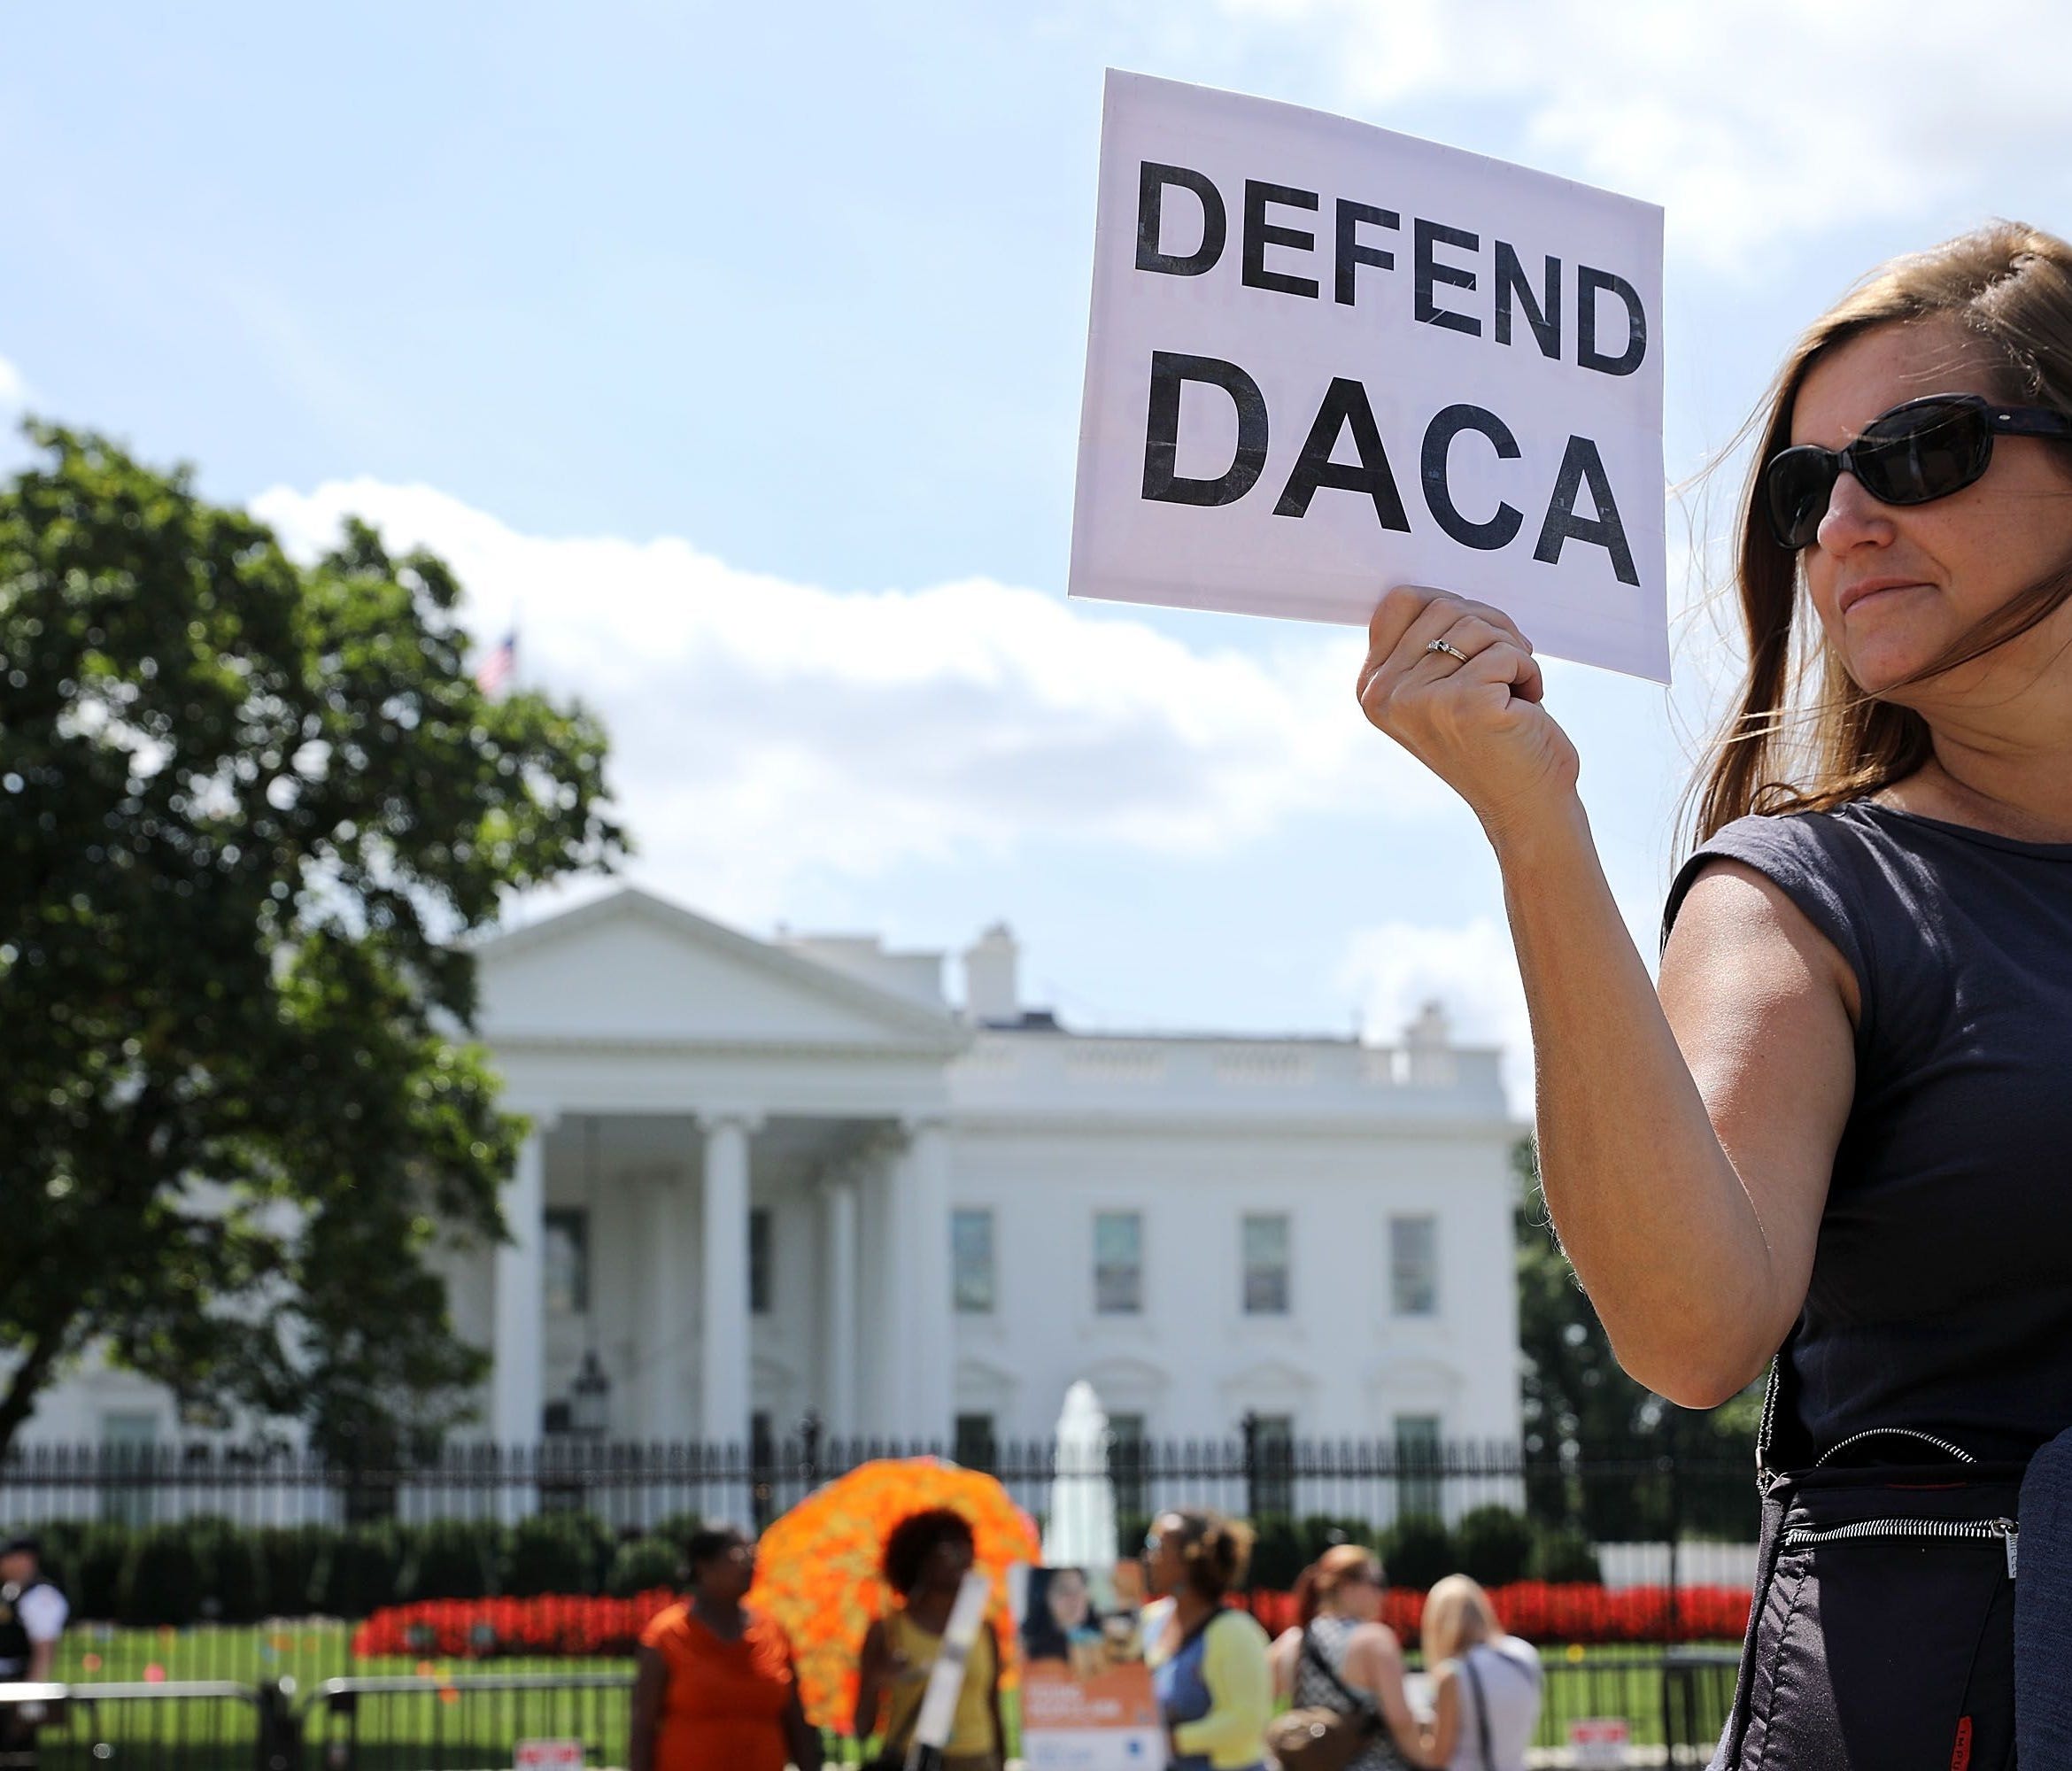 Pro-DACA protesters outside the White House.